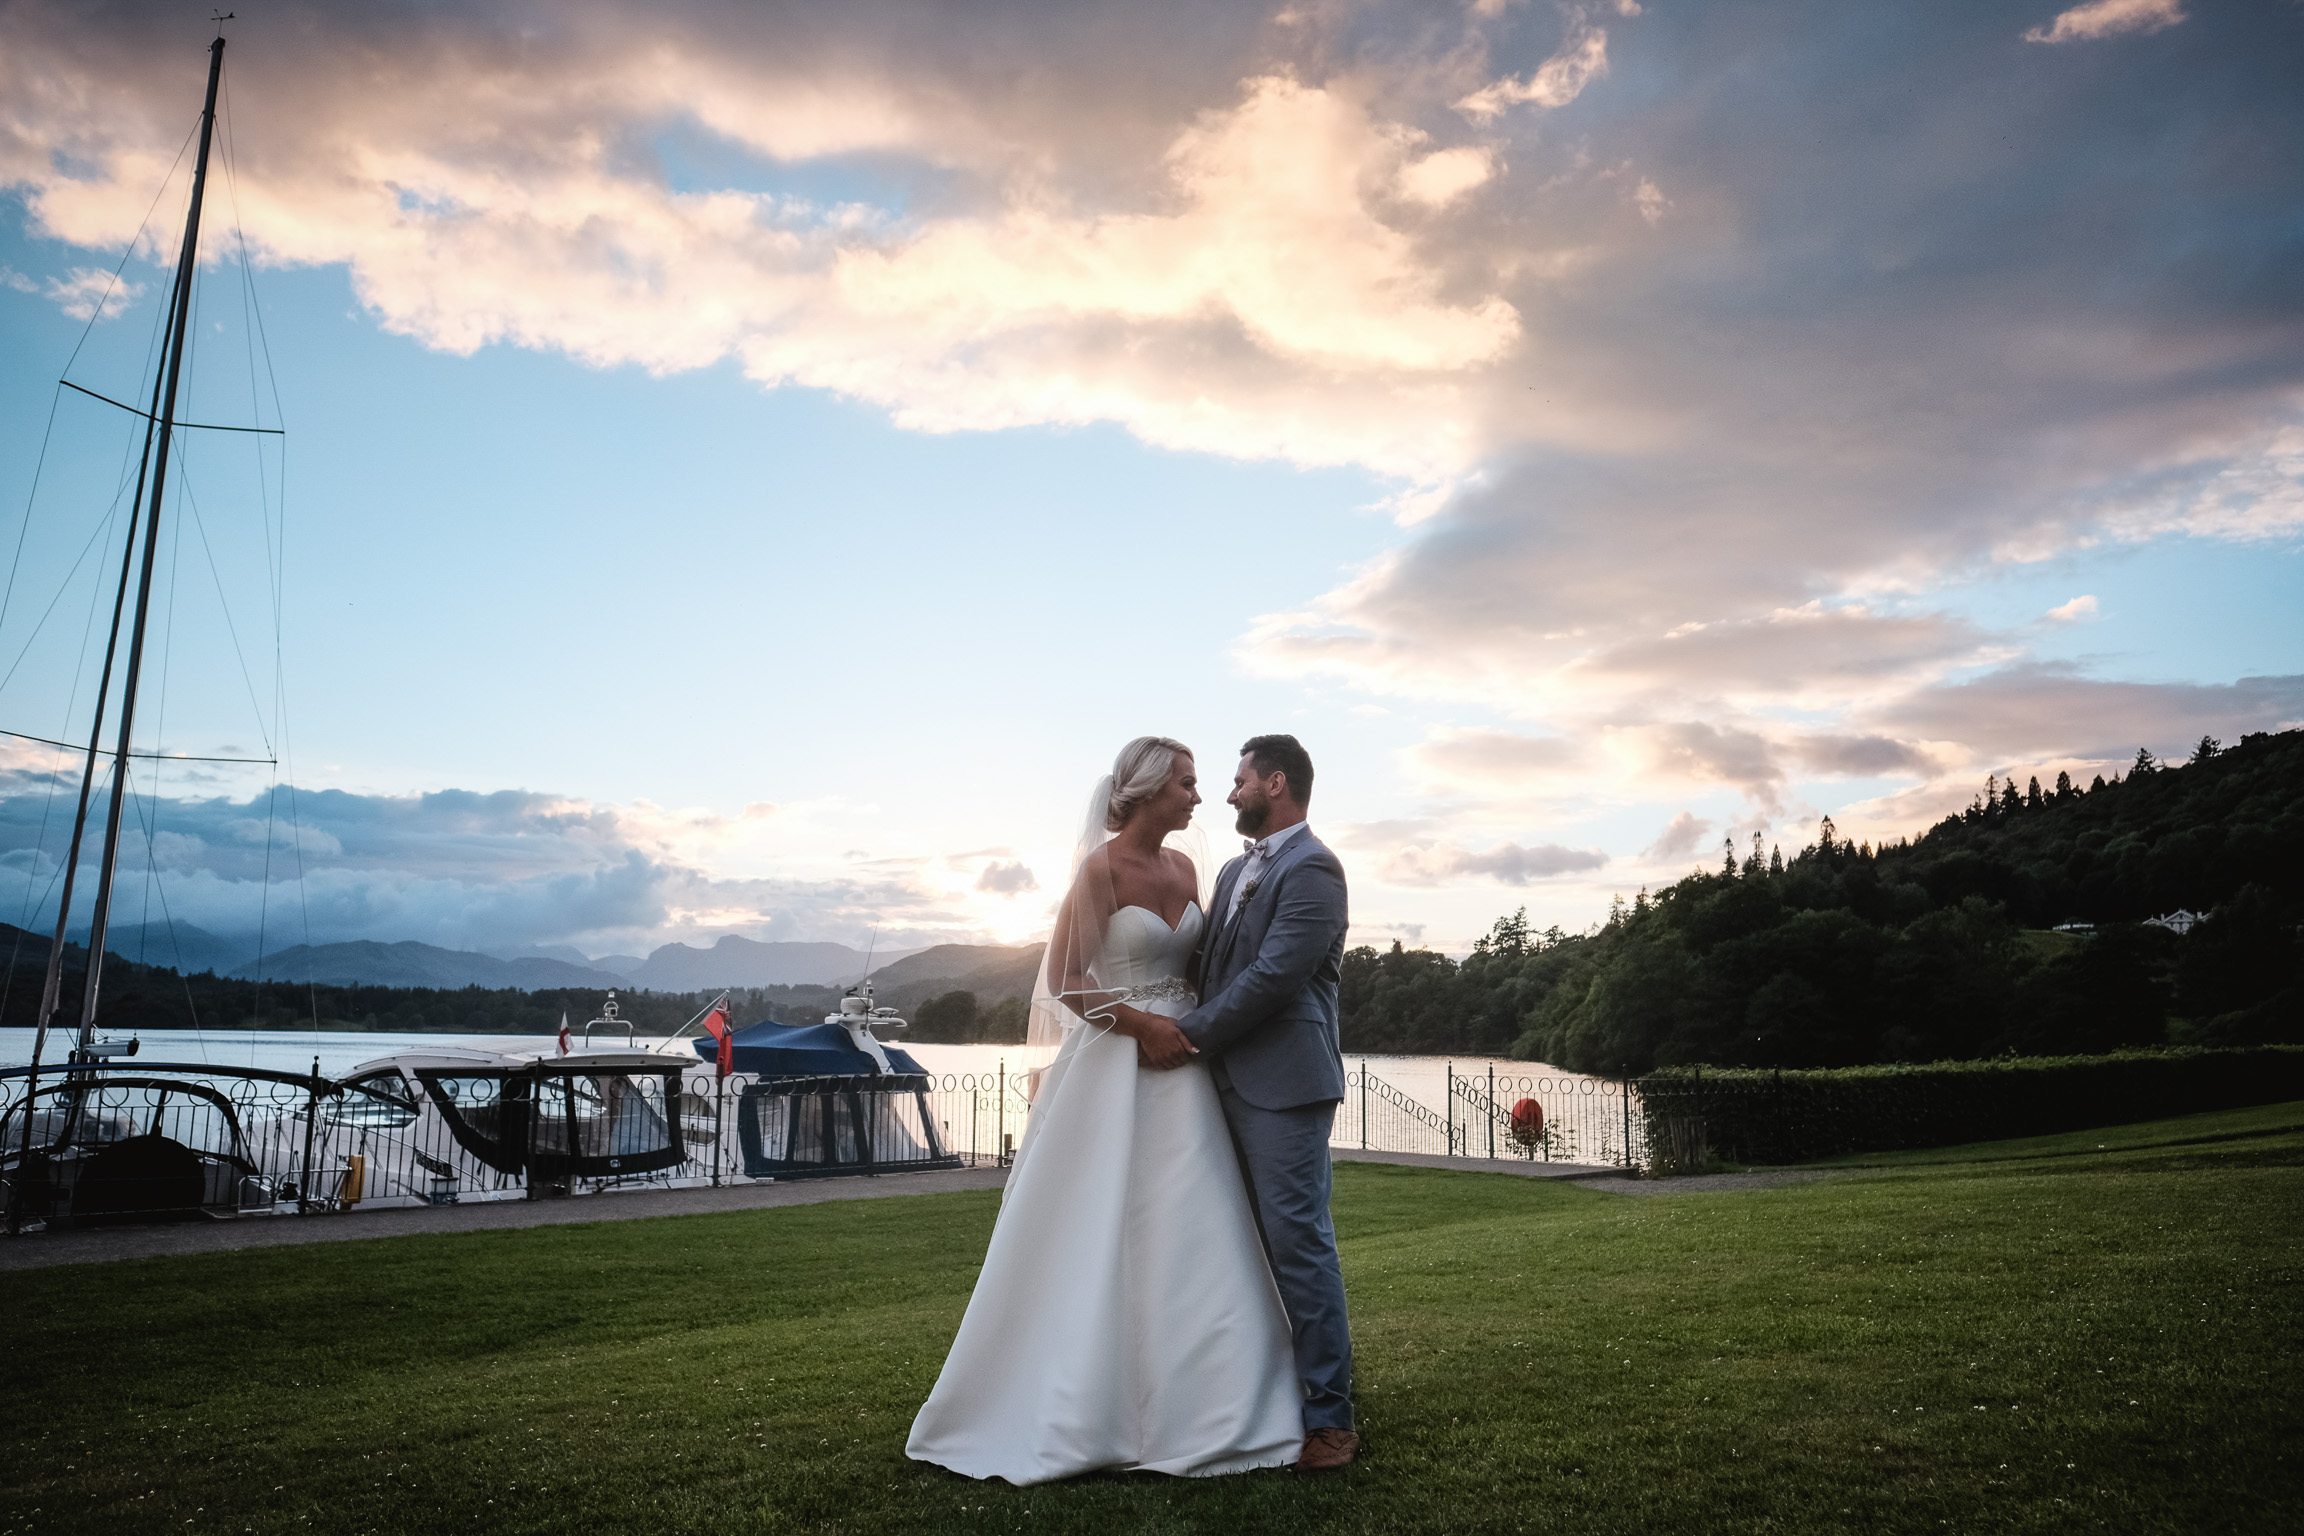 Low wood bay wedding photographer in widermere documentry wedding photography north west cumbria (129 of 131).jpg